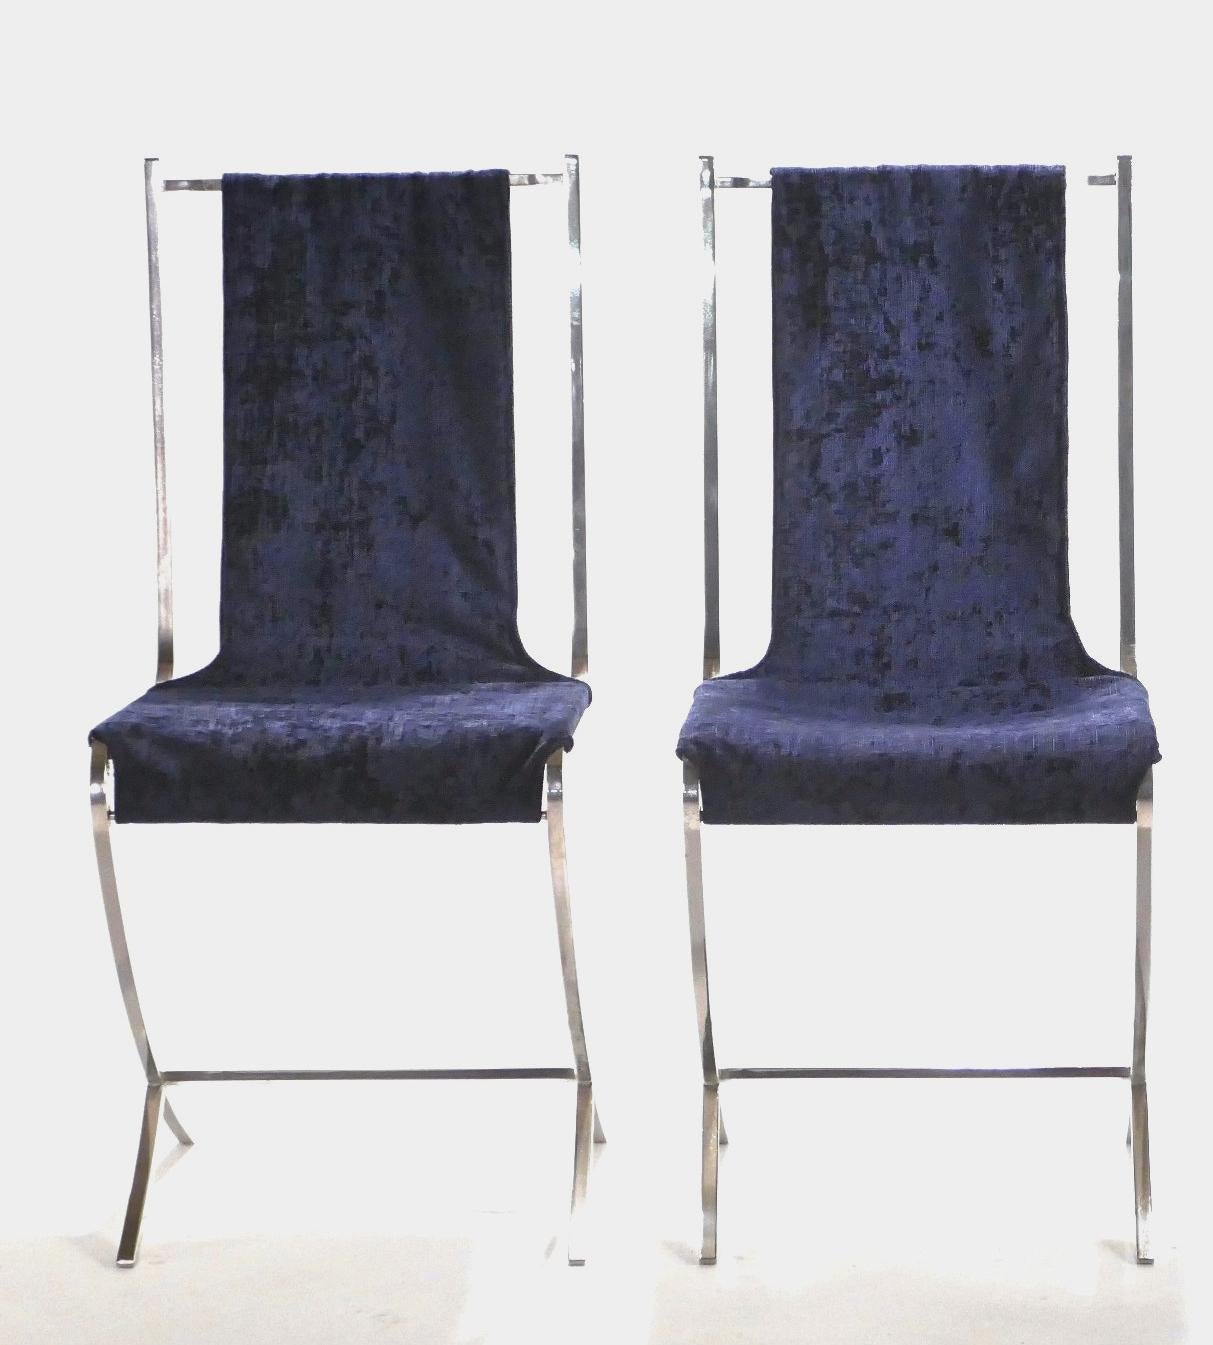 Lounge on extravagant deep blue velvet, suspended across a sturdy, but artfully imagined structure made of heavy nickeled metal. This set of 4 chairs was created by French Avant Garde designer Pierre Cardin for well-known interior design firm Maison